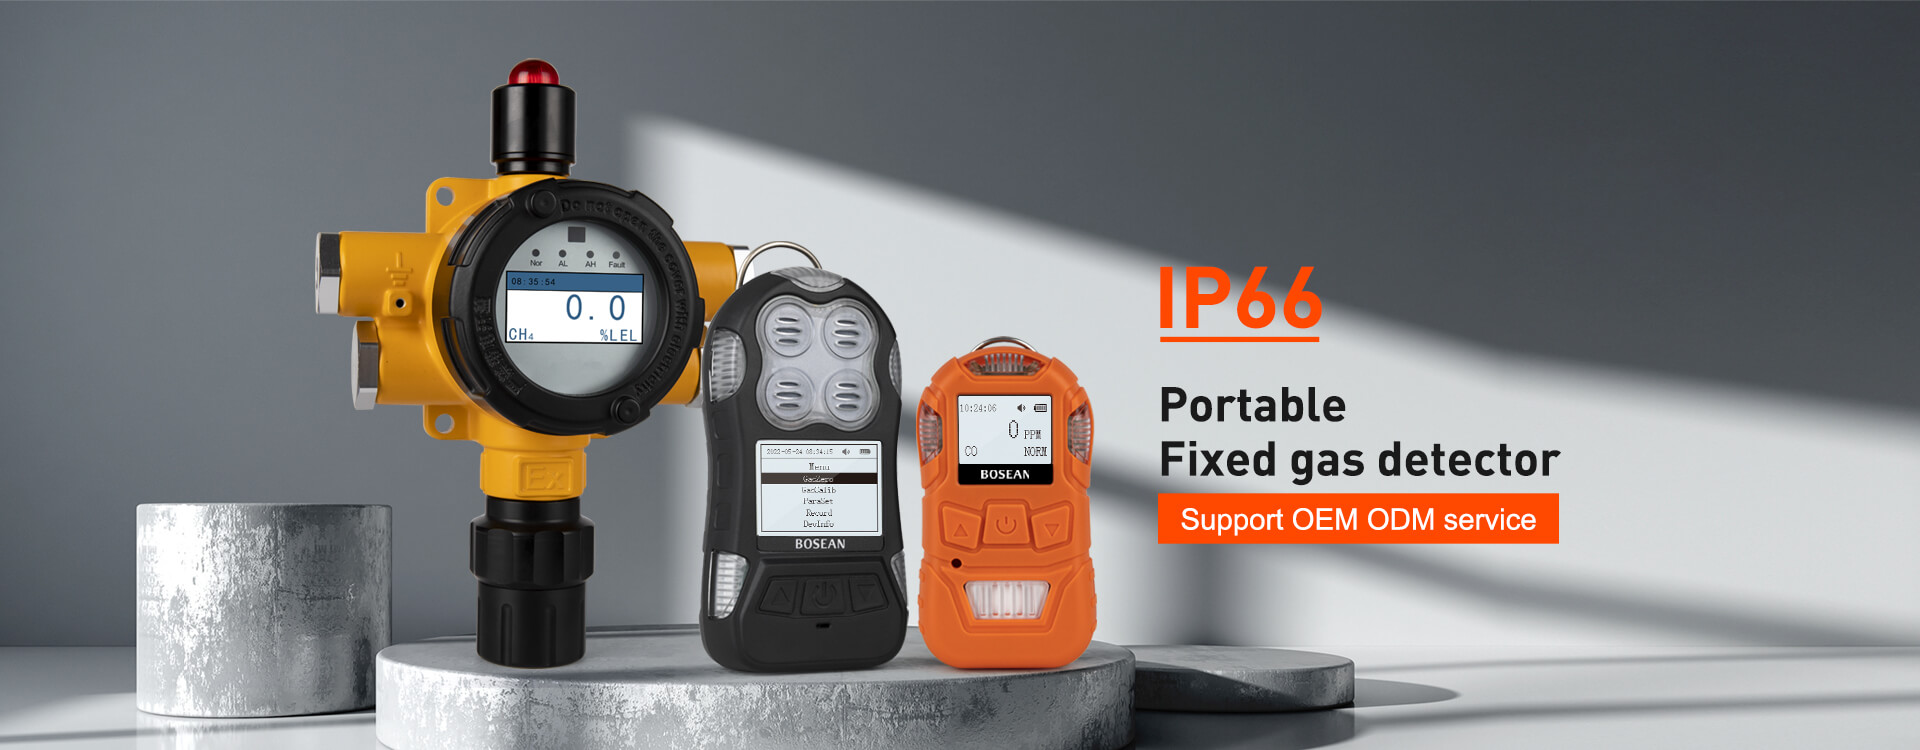 IP66 portable & fixed gas detector